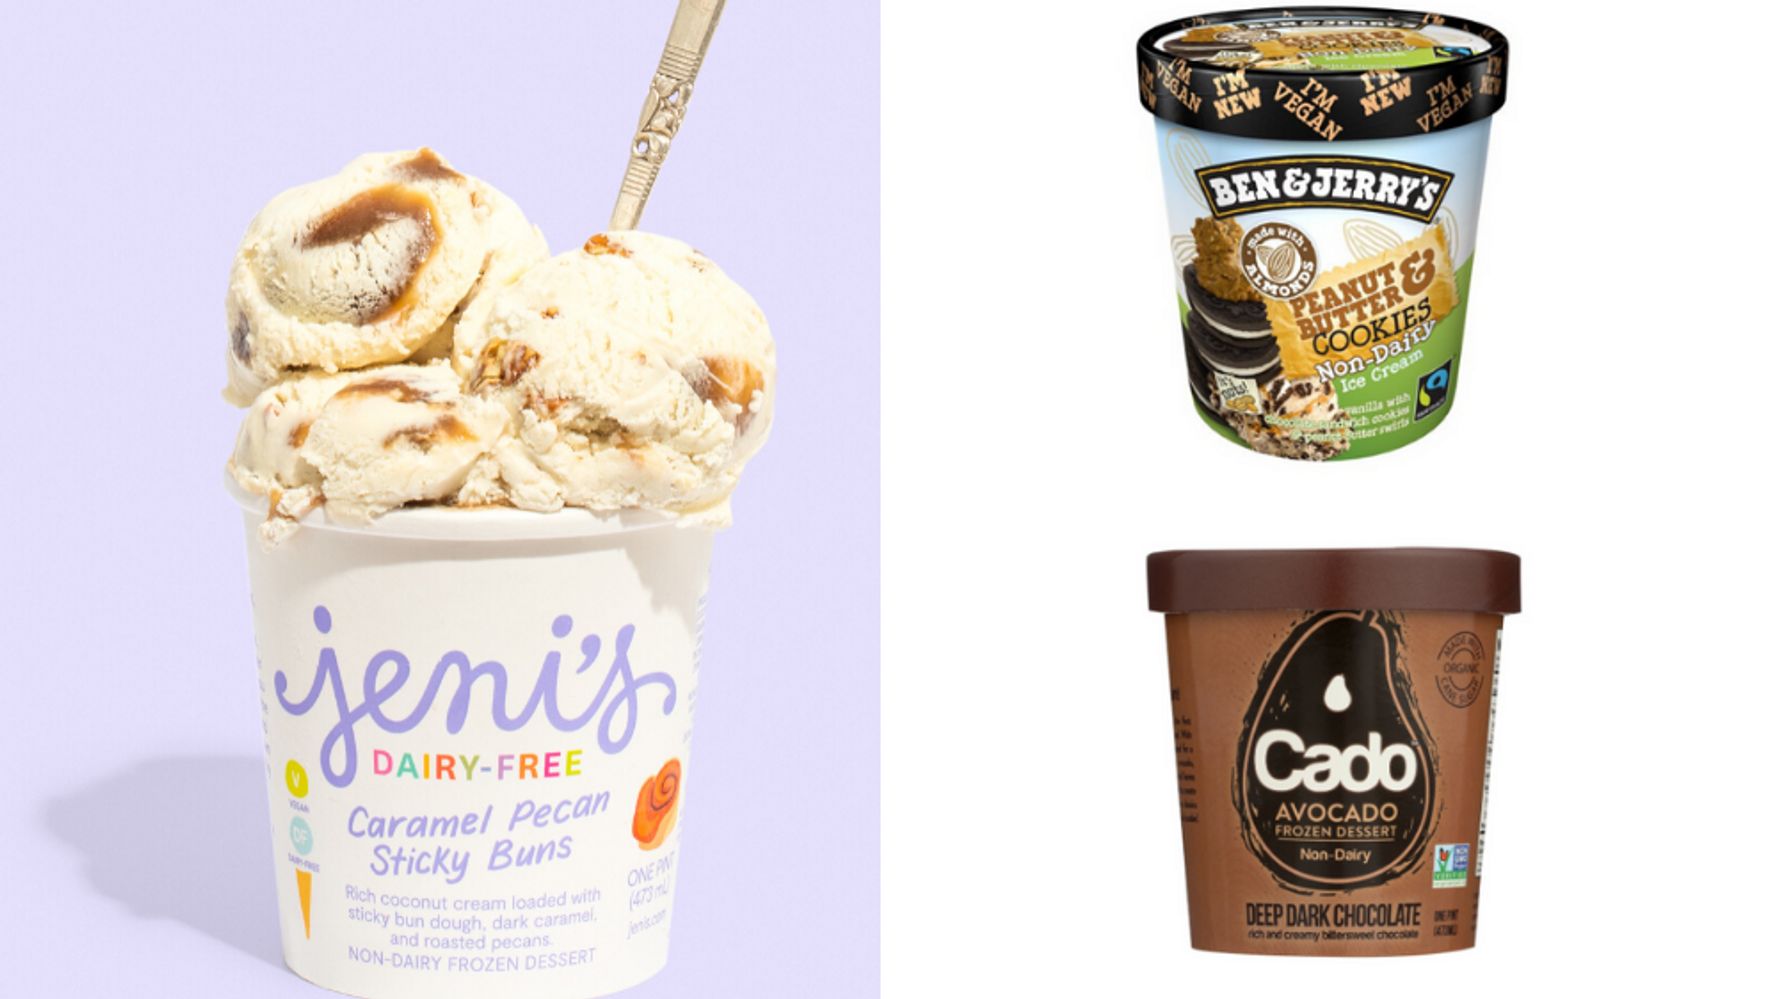 10 Of The Best Dairy-free Ice Cream Flavors You Can Buy photo